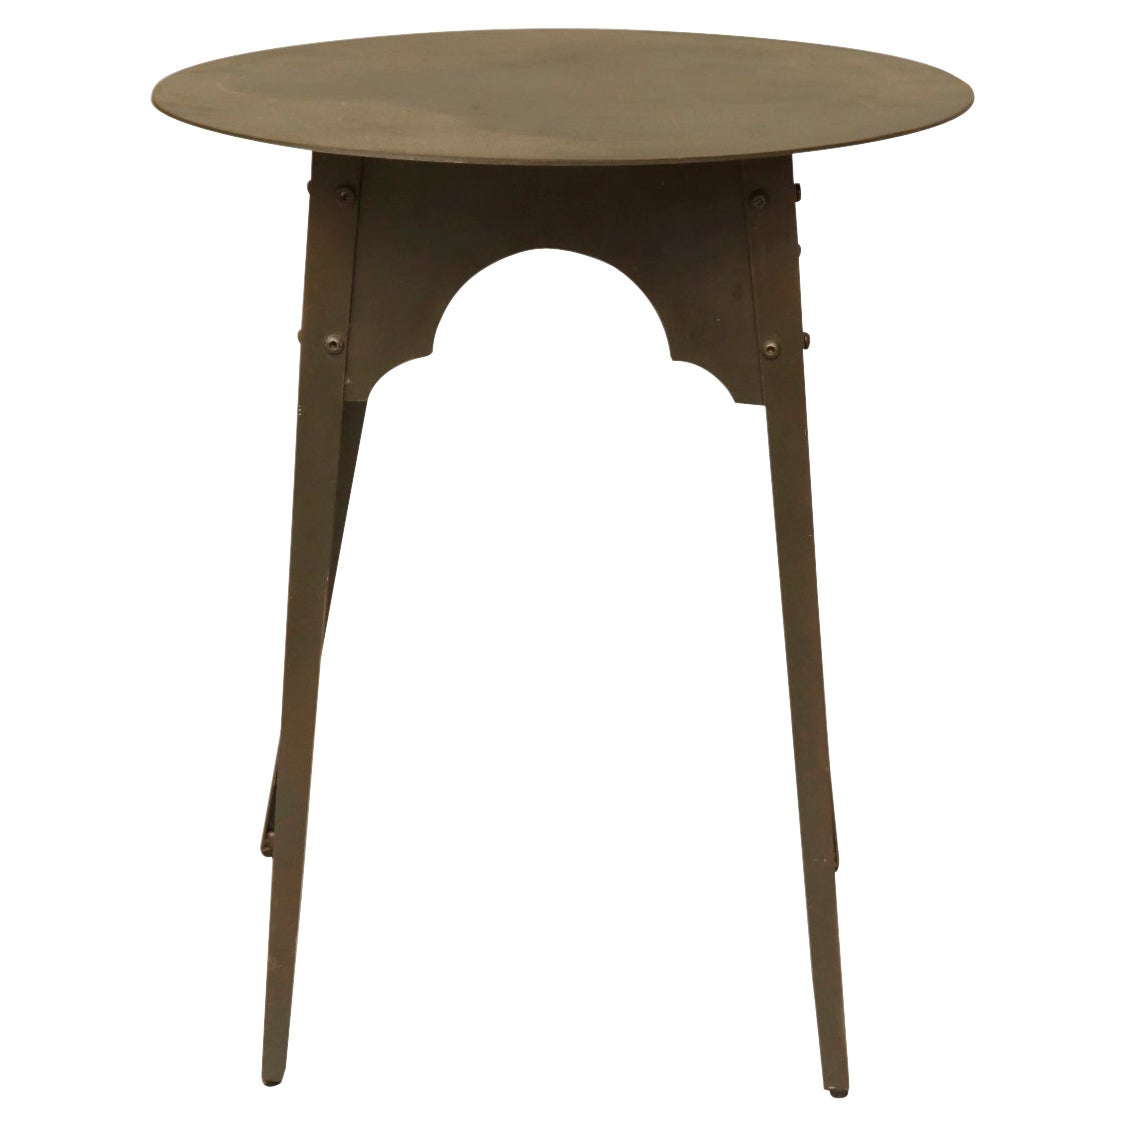 Contemporary Steel Table with "Period" Cut-Out For Sale